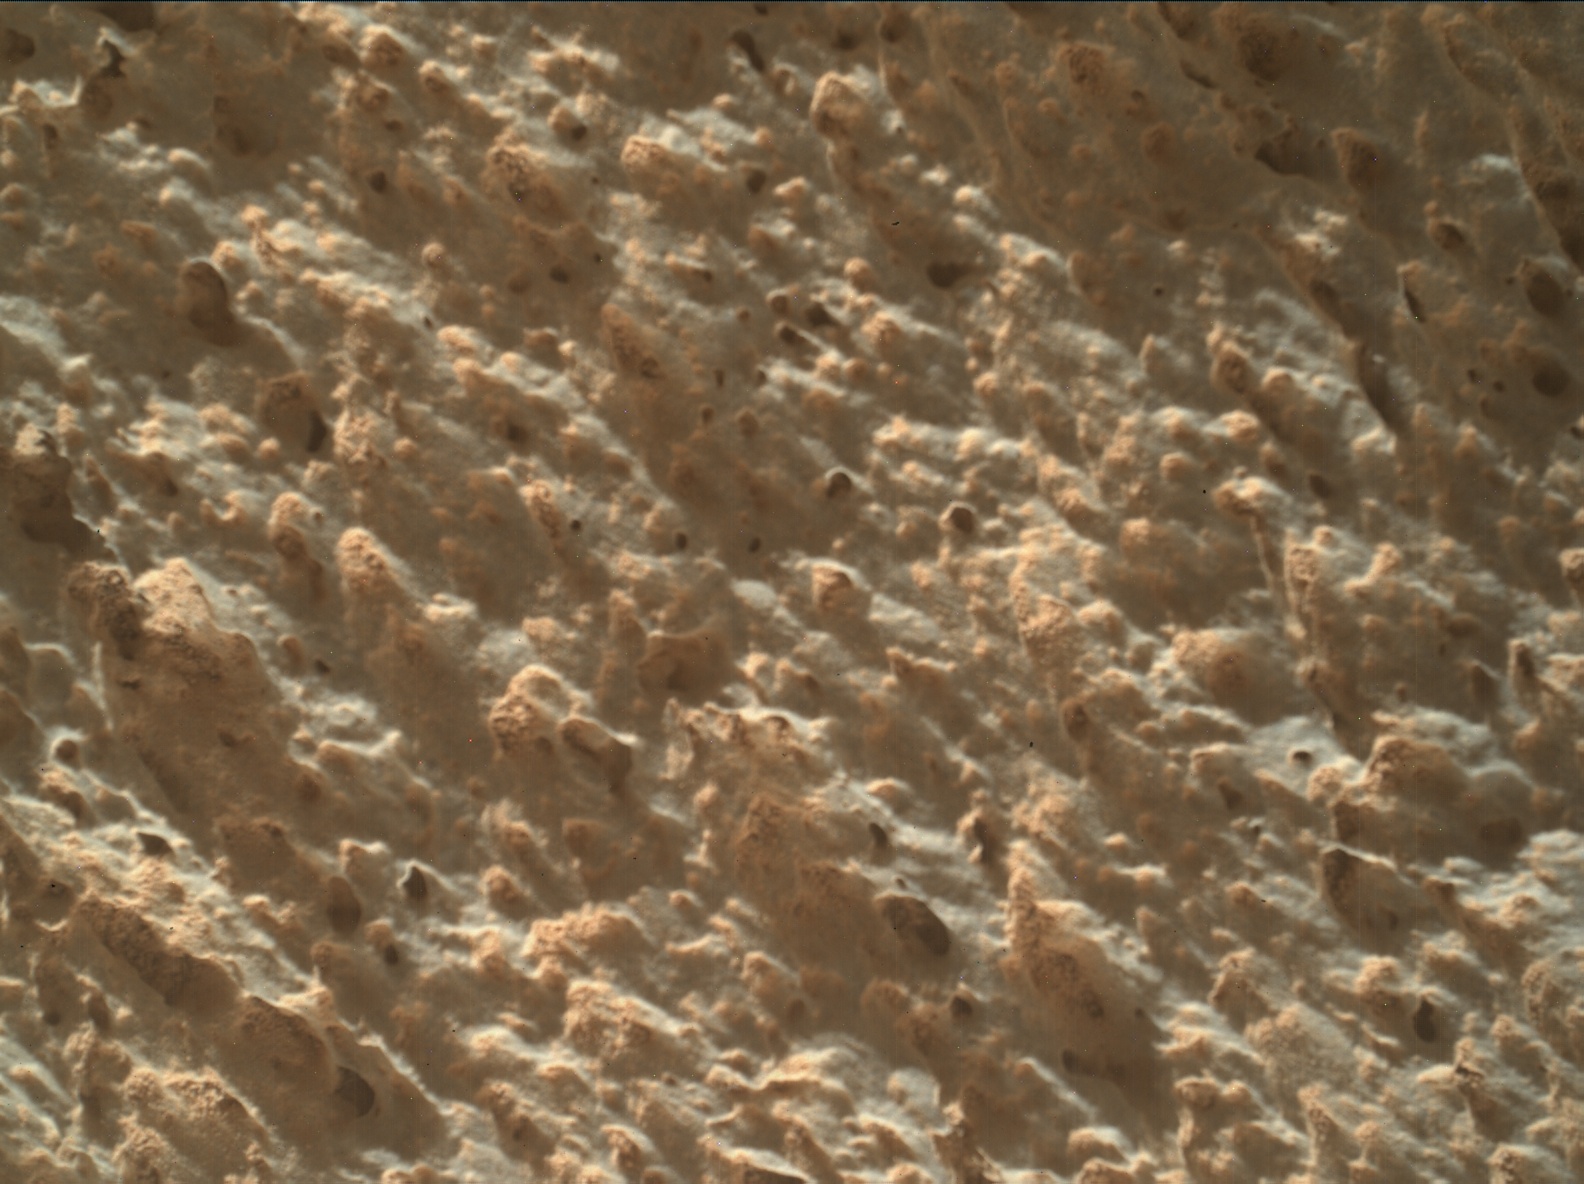 Nasa's Mars rover Curiosity acquired this image using its Mars Hand Lens Imager (MAHLI) on Sol 3425